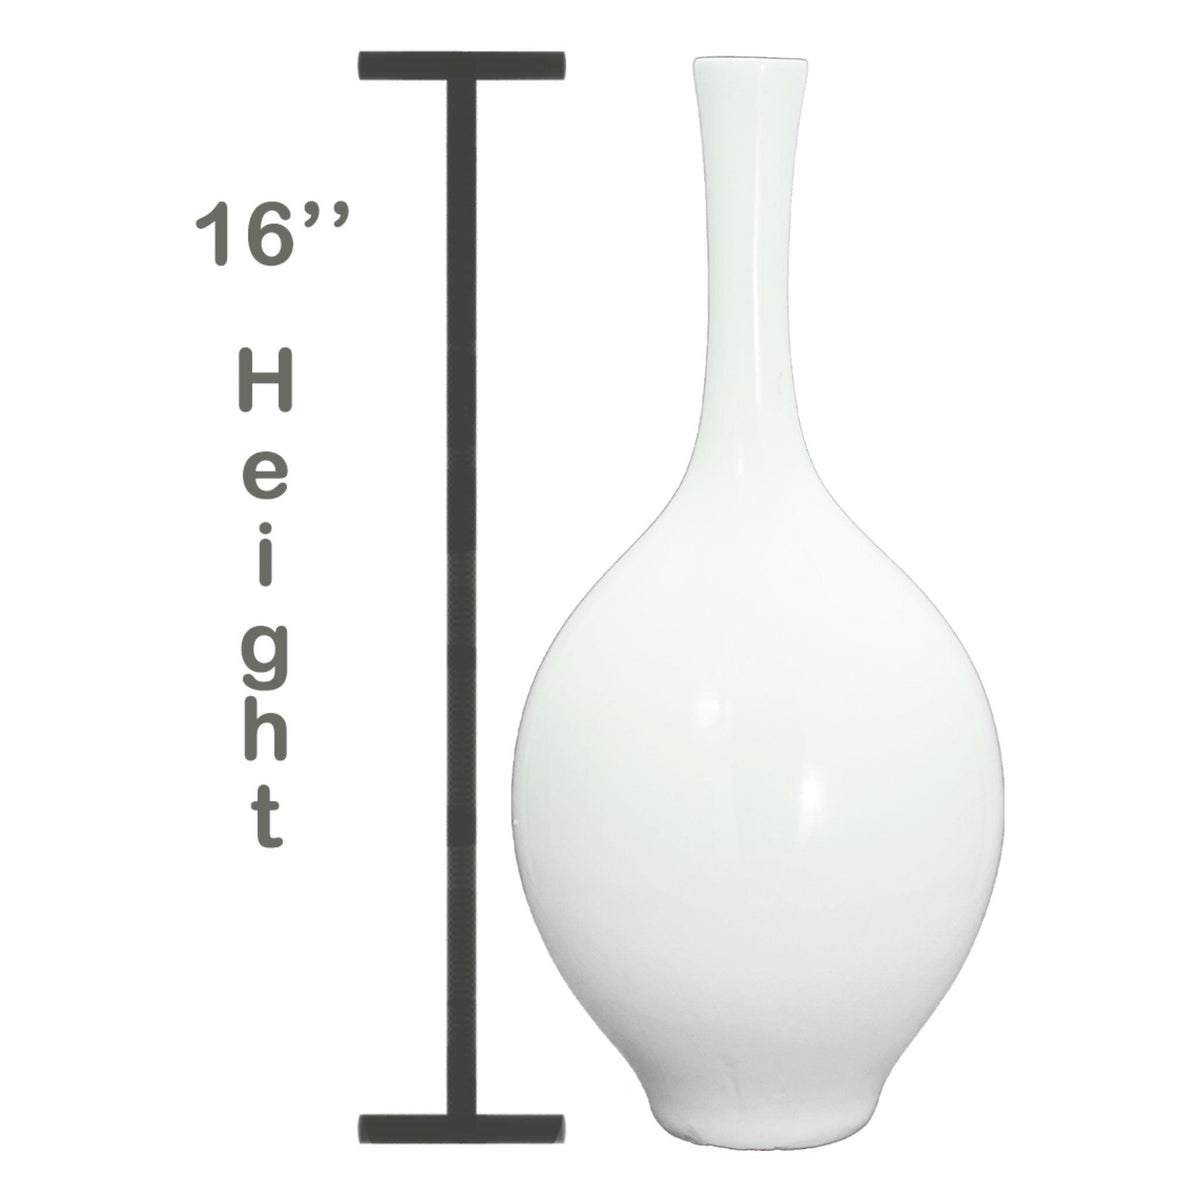 Lee Display's brand new 16in Modern Ceramic Vase comes in a high gloss white finish on sale at leedisplay.com